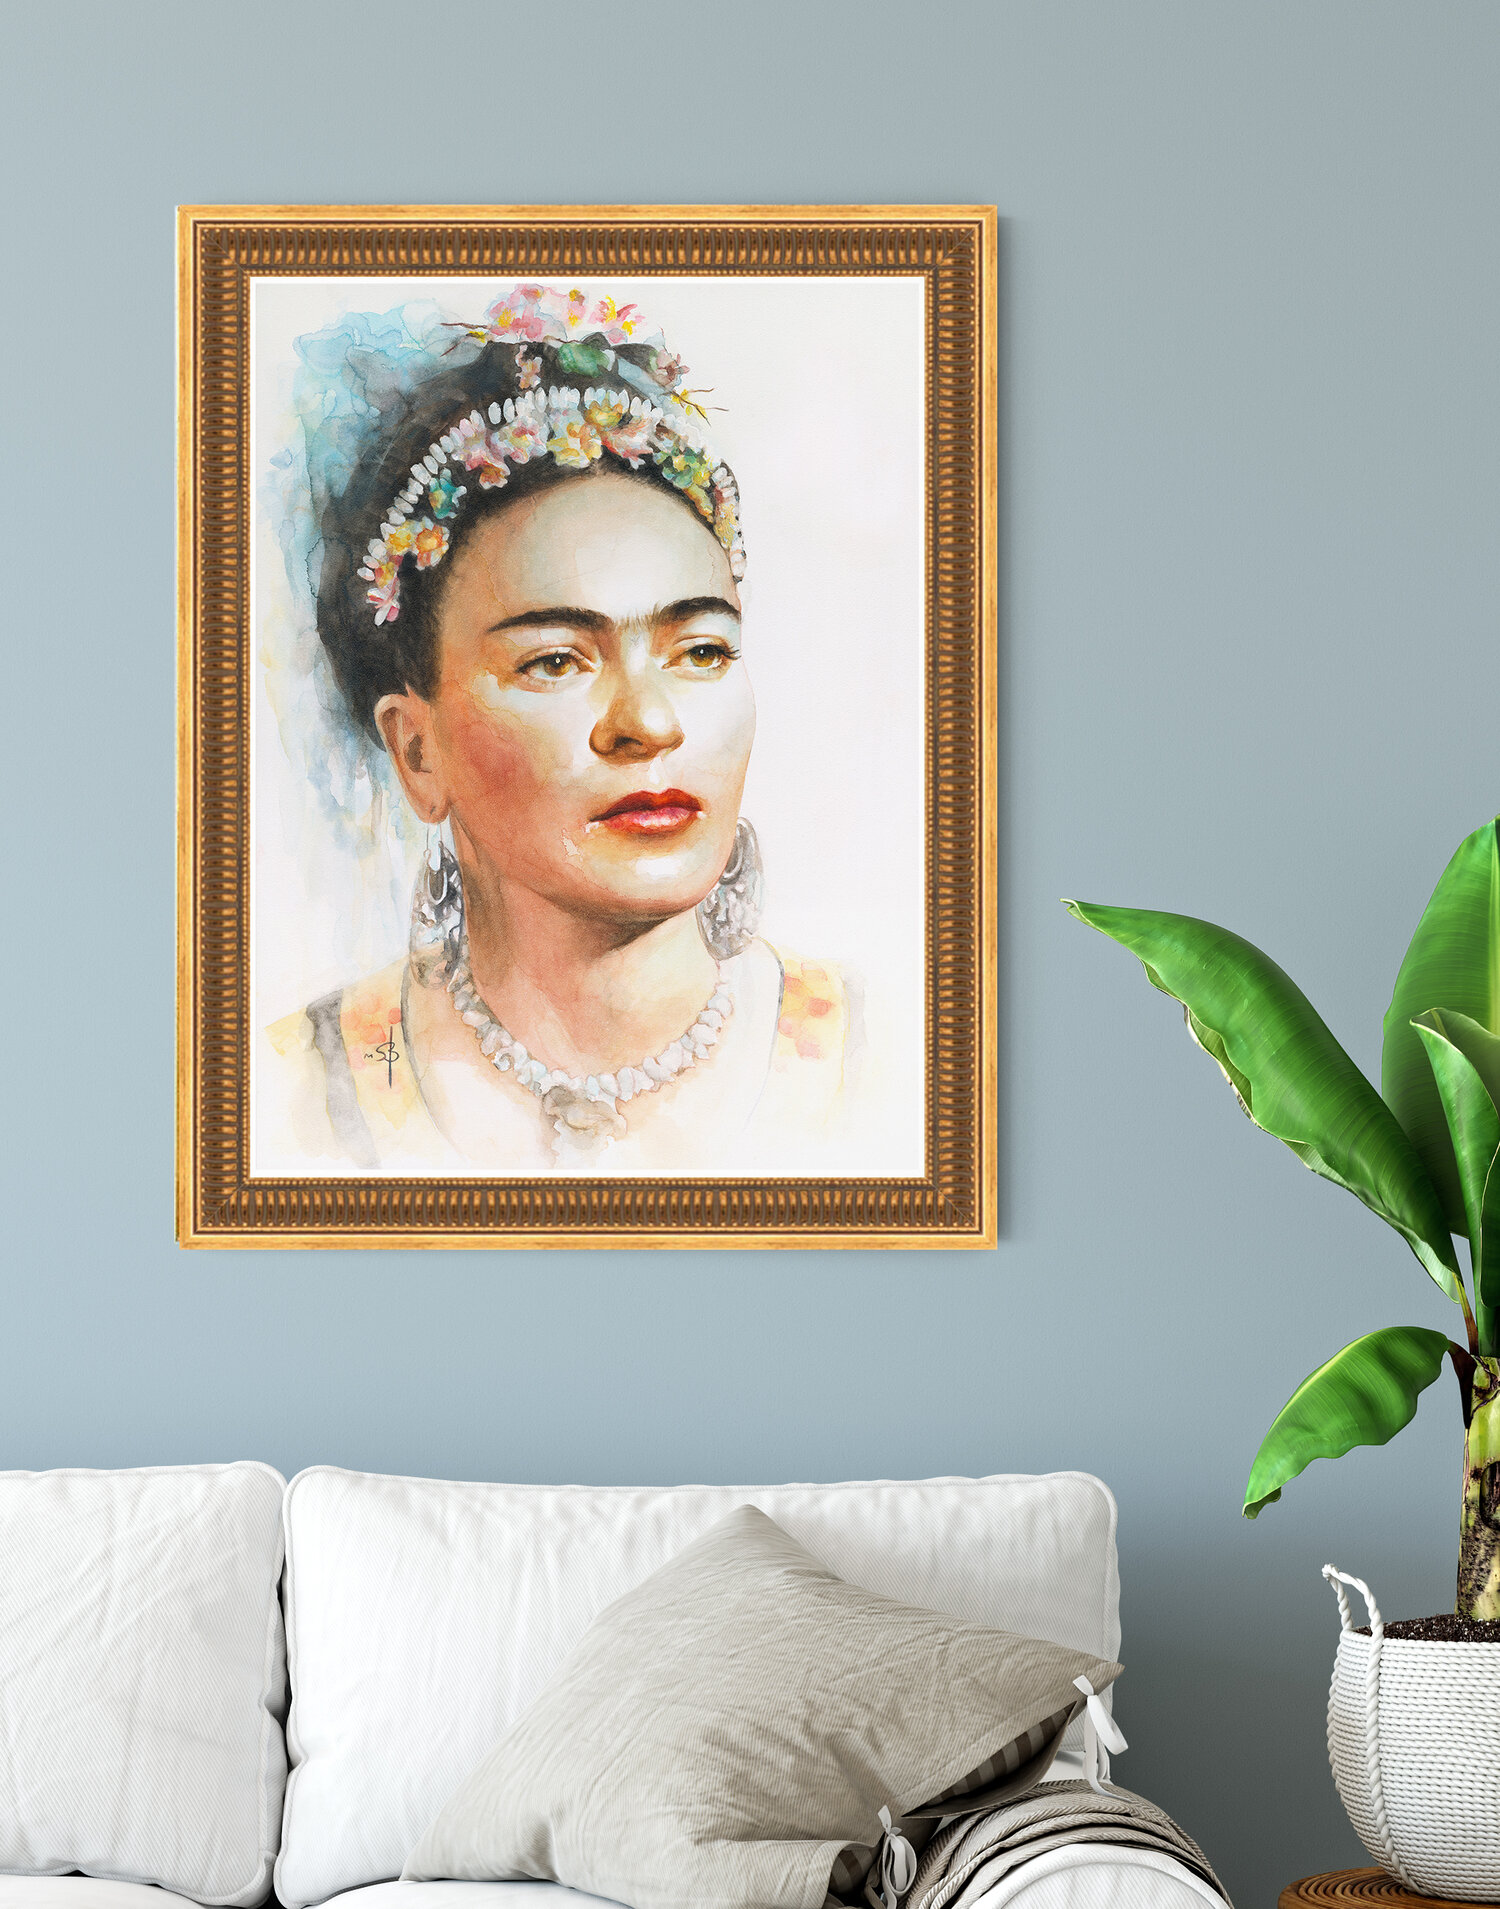 Queen Frida Archival Print on Paper — Misty Segura-Bowers